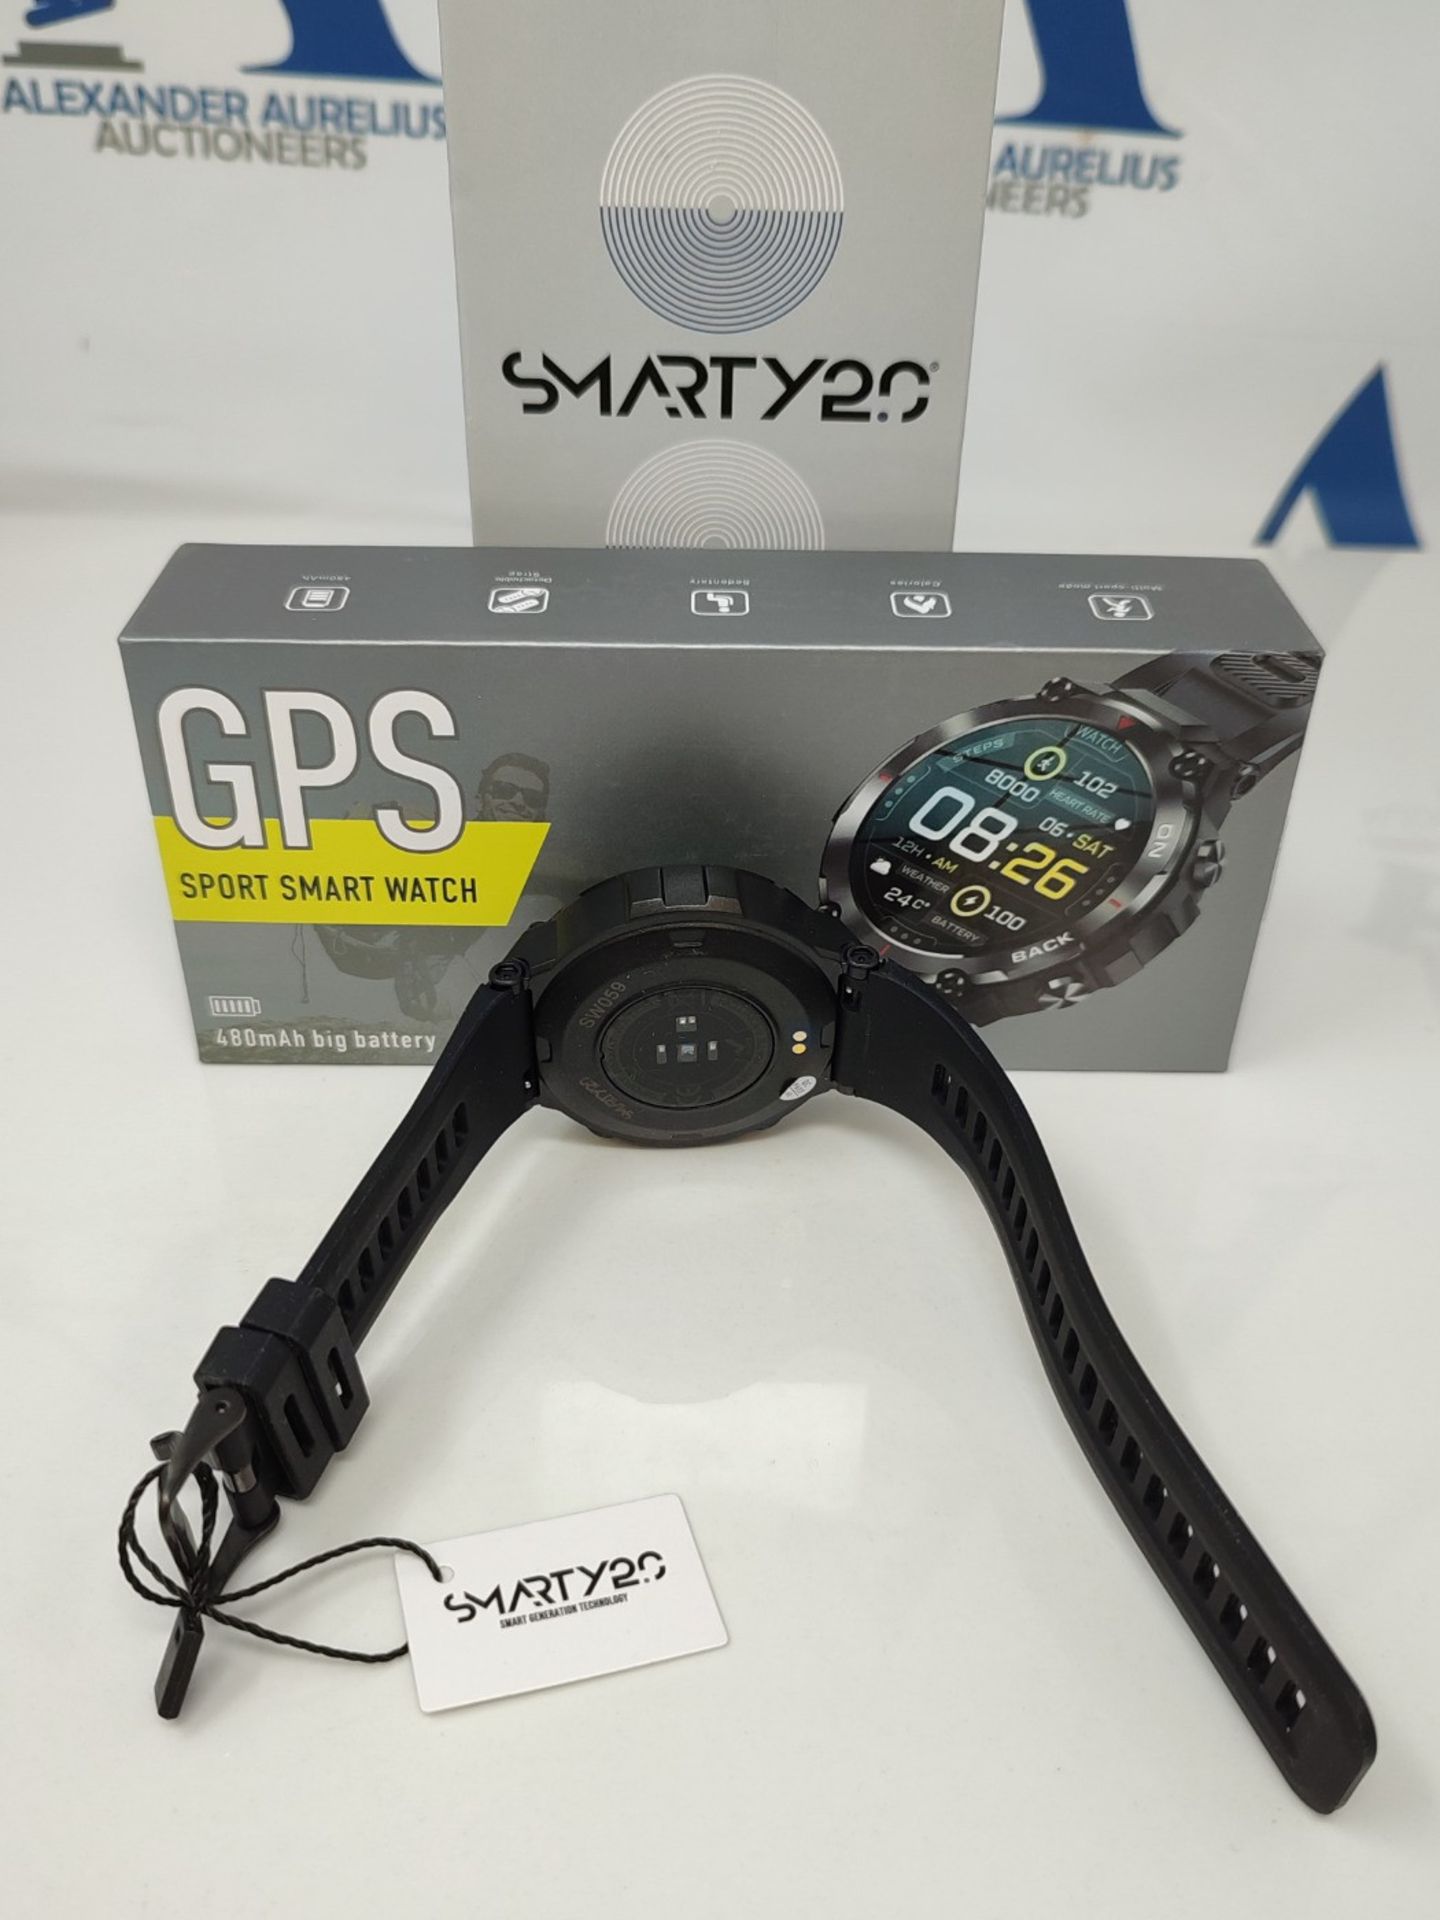 RRP £138.00 SMARTY2.0 - Smartwatch SW059A - Black Color - Optimized GPS, High Efficiency Battery, - Image 3 of 6